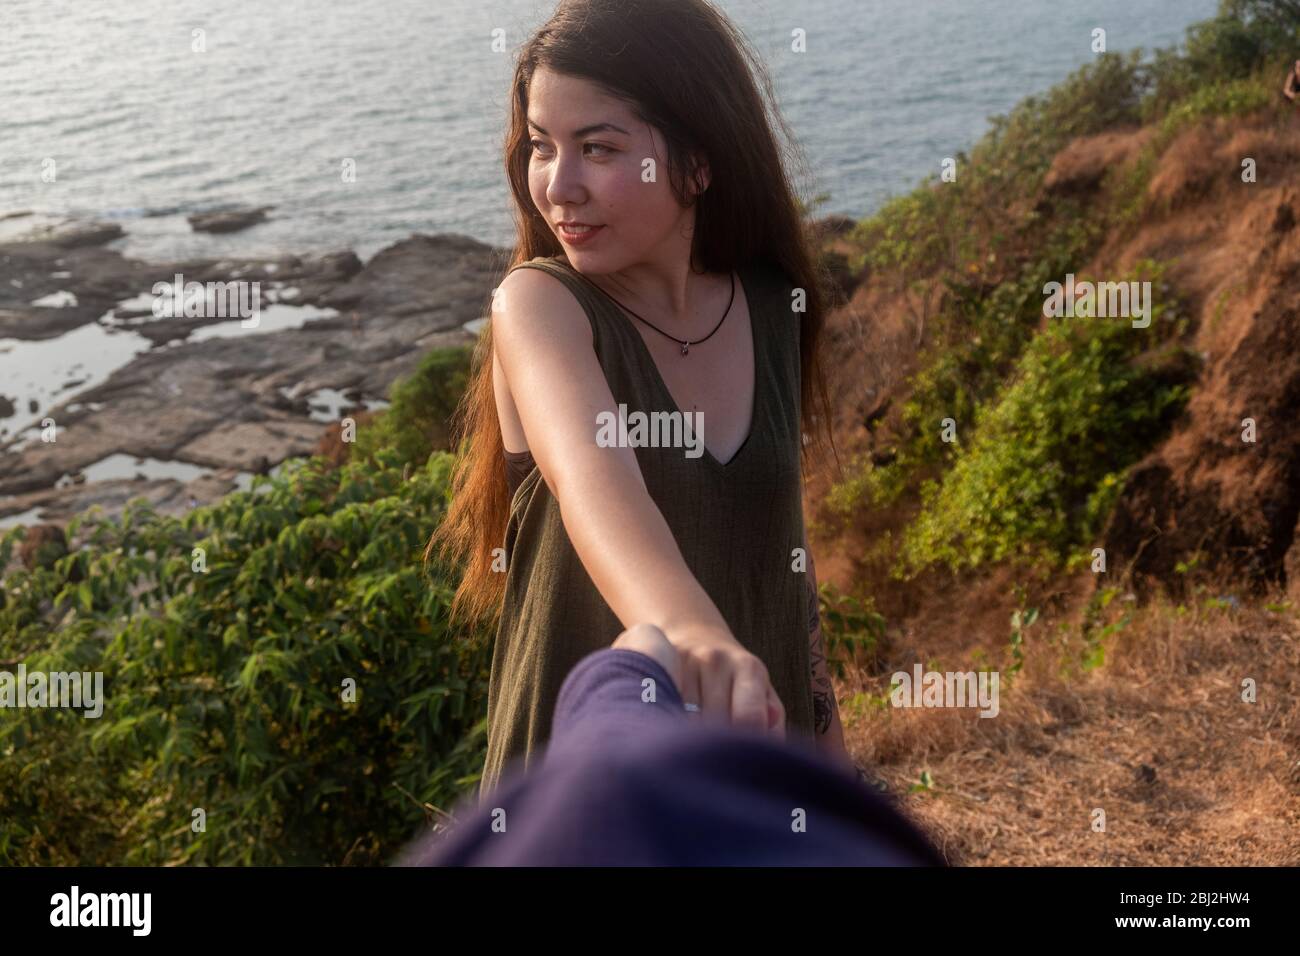 Shot of a young woman leading someone by the hand at the beach Stock Photo